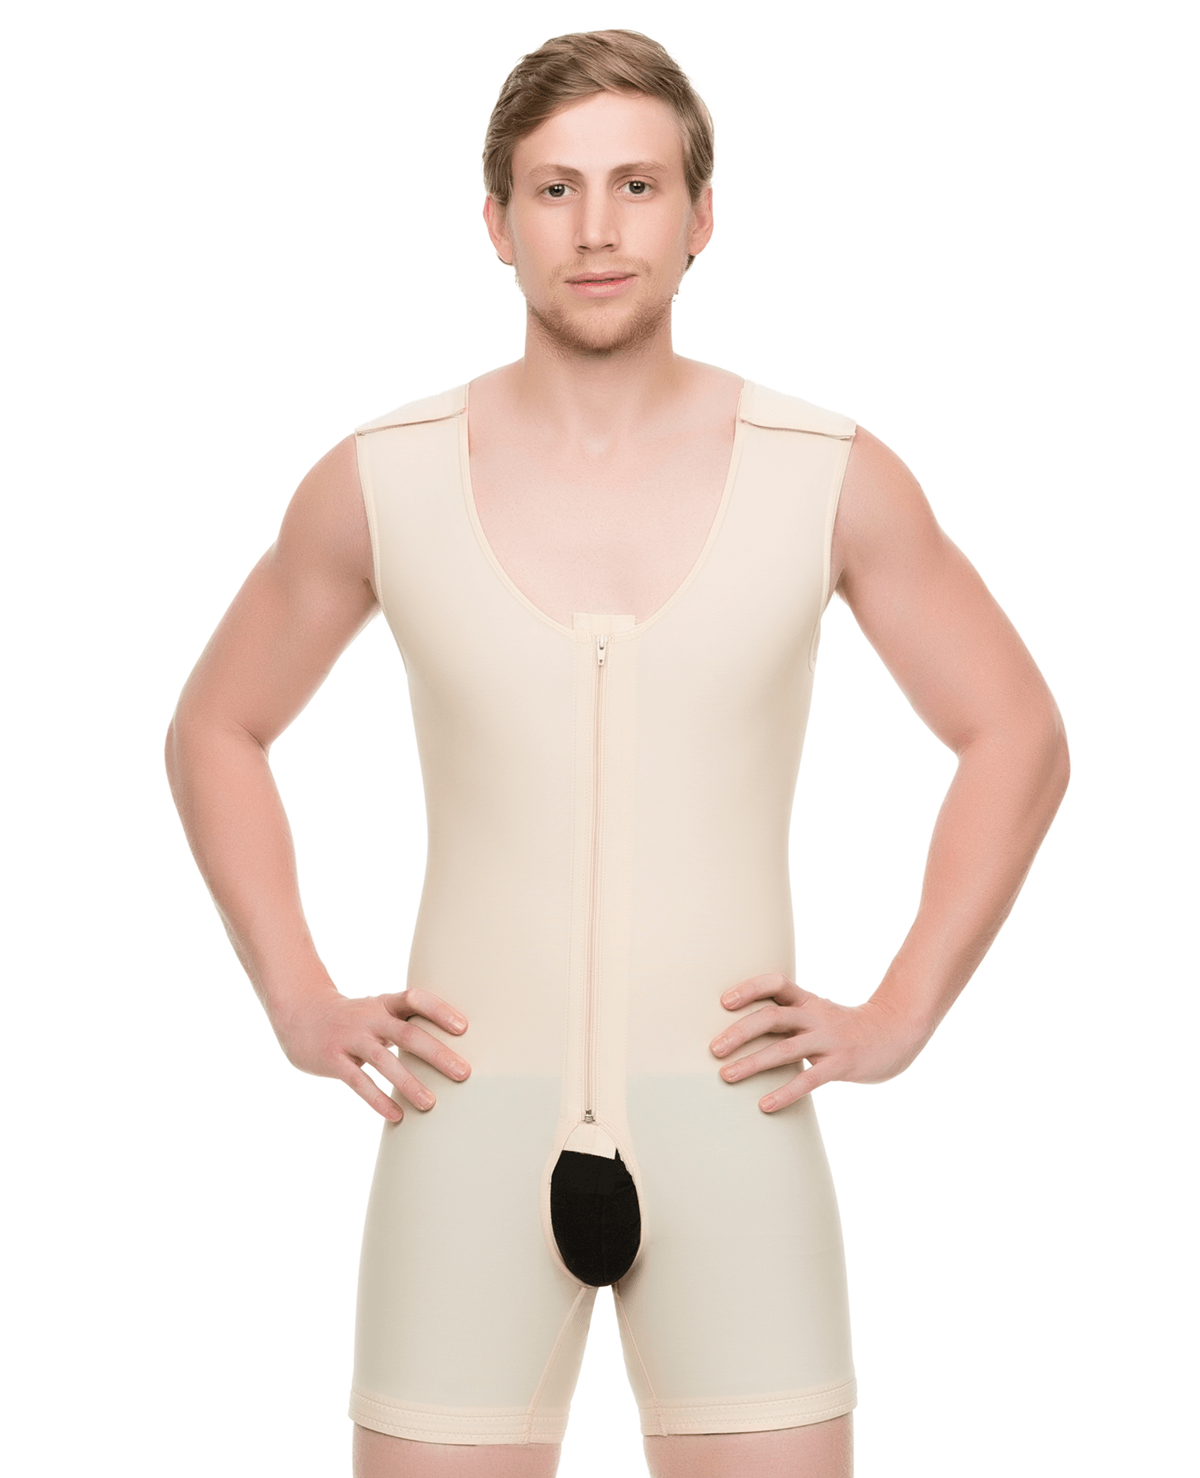 The Male Girdle is specifically designed to provide optimal